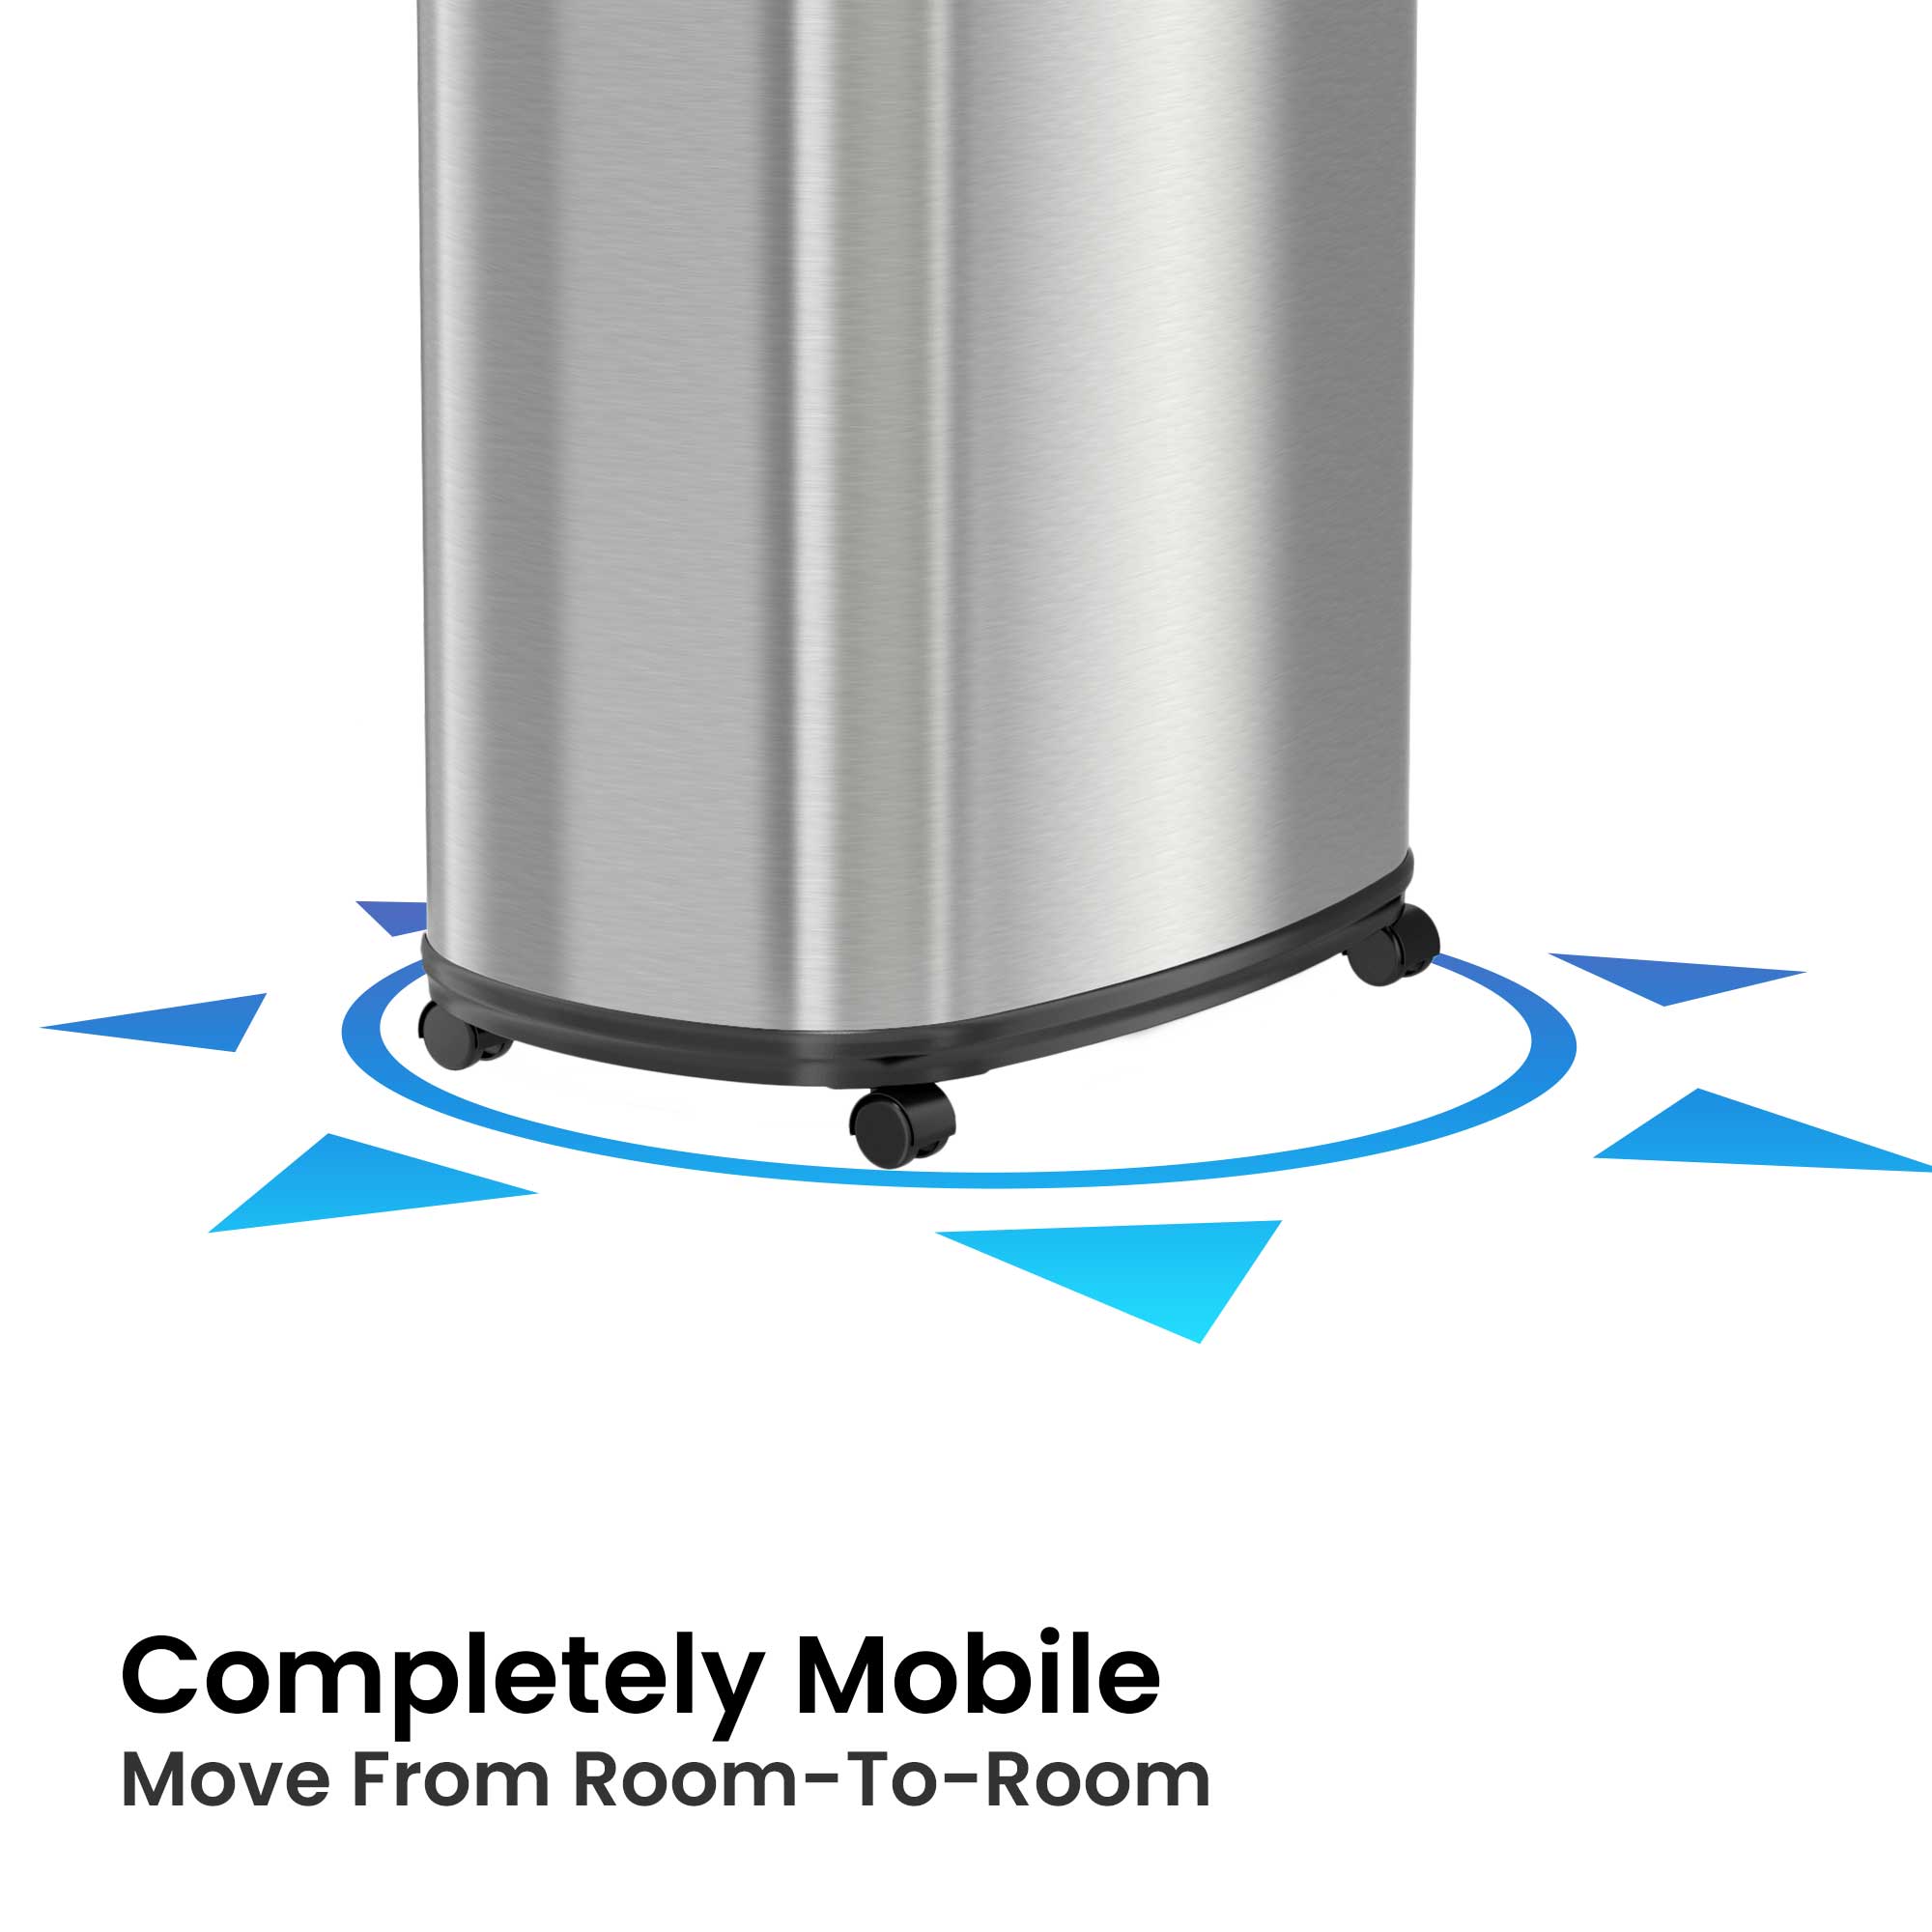 Kitchen Trash Cans – Stainless Steel, Auto-Open, Rolling